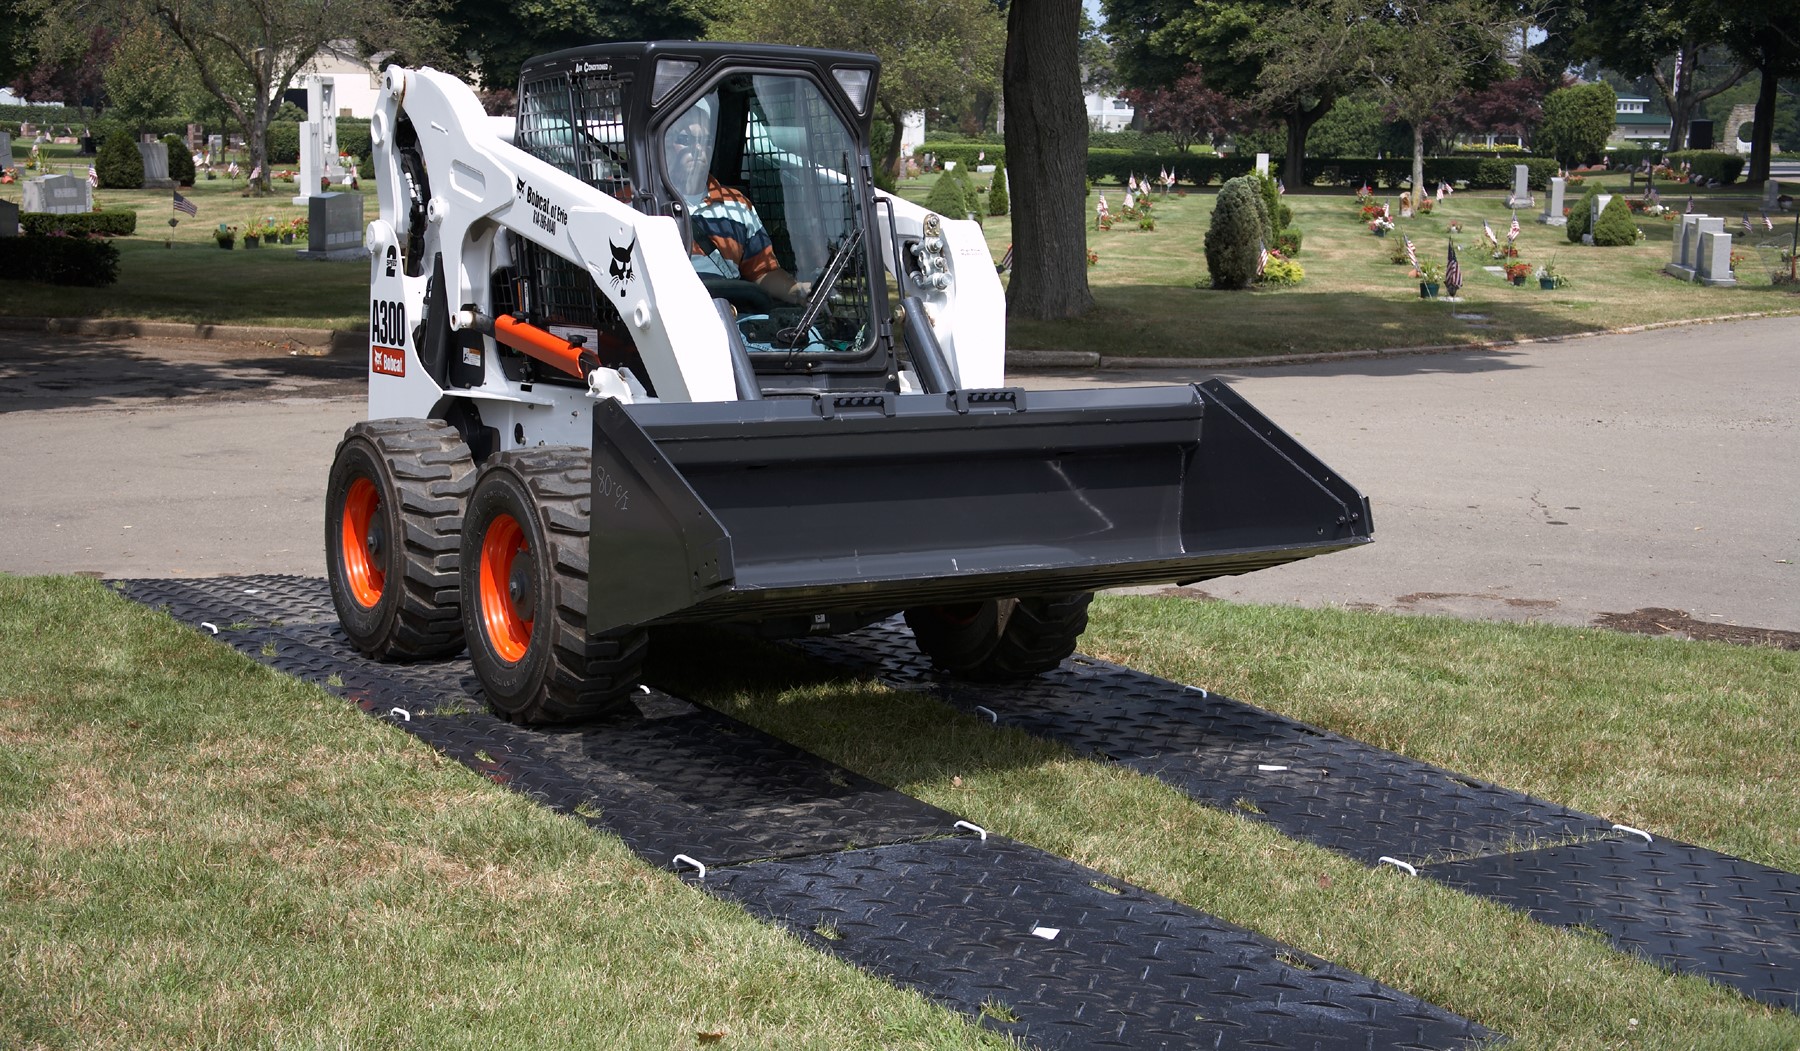 Construction mats protect lawn from damage caused by skid steer